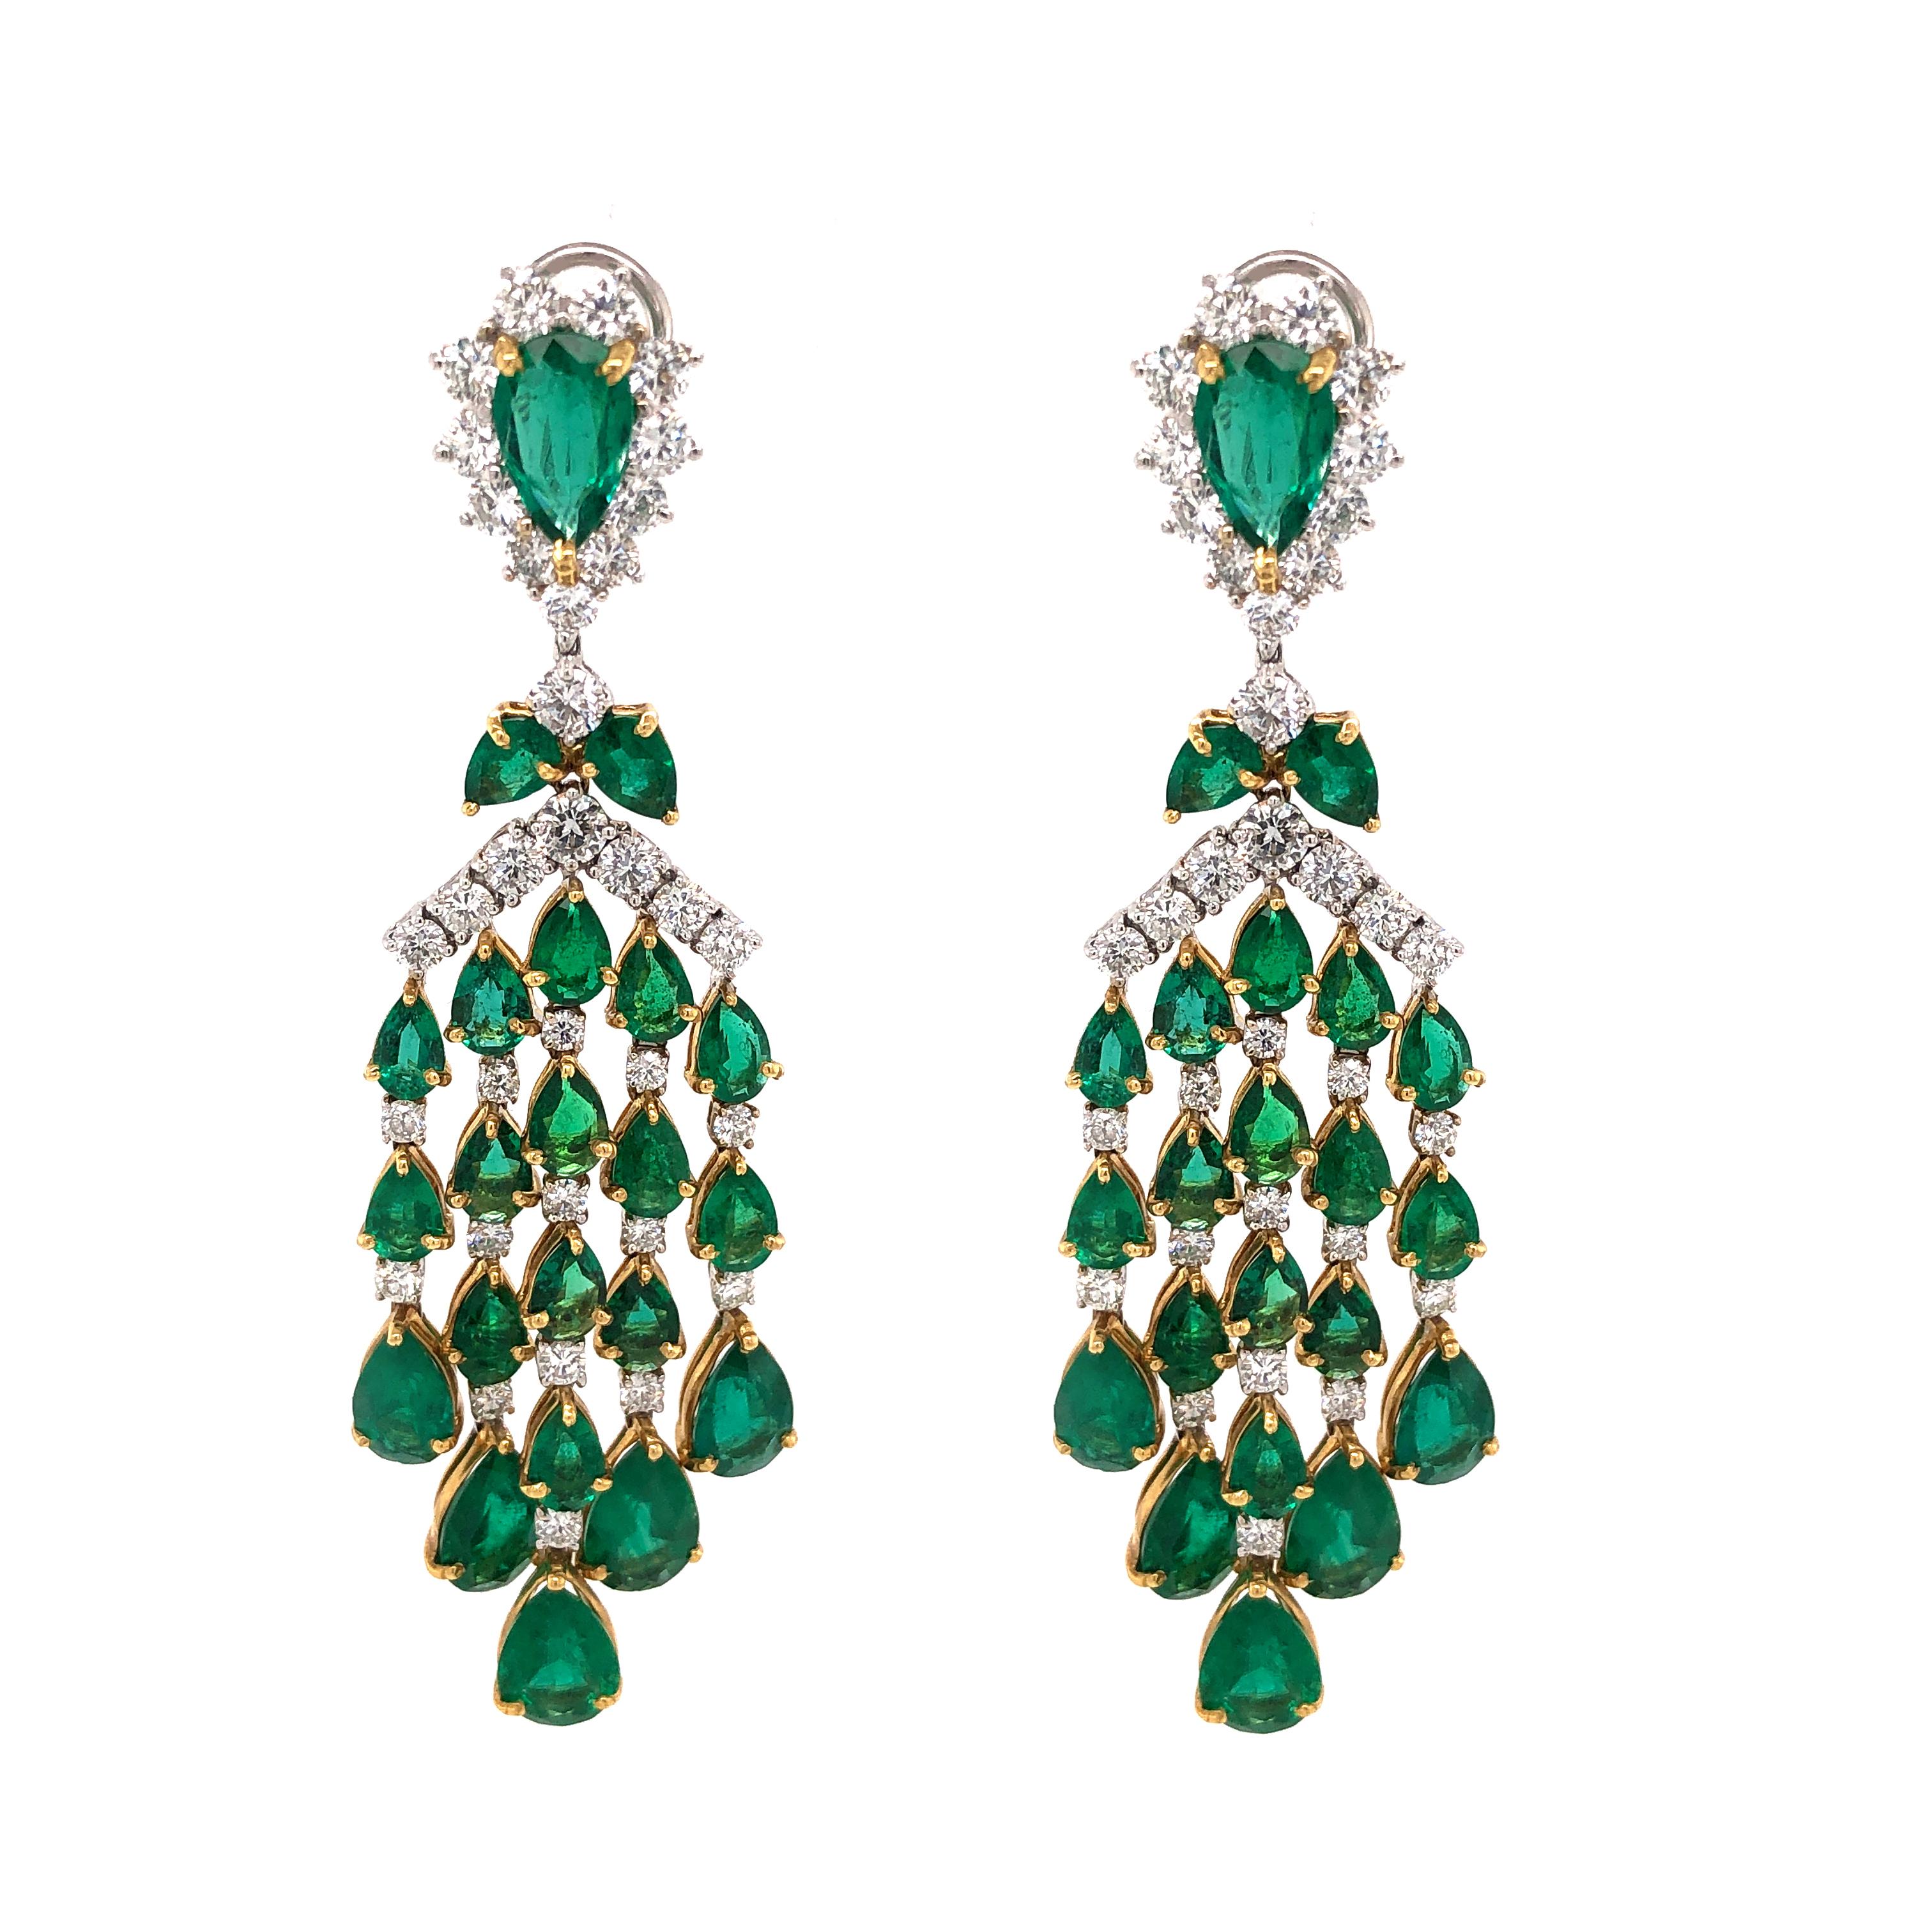 Handcrafted chandelier 18 karat white gold earrings.
Adorned with pear cut emeralds 23.82 ct from Zambia.
Accented with small round diamonds 5.42 ct. 
Diamonds are all natural and white in G-H Color Clarity VS.
French / Omega Clips.
Width: 2.5